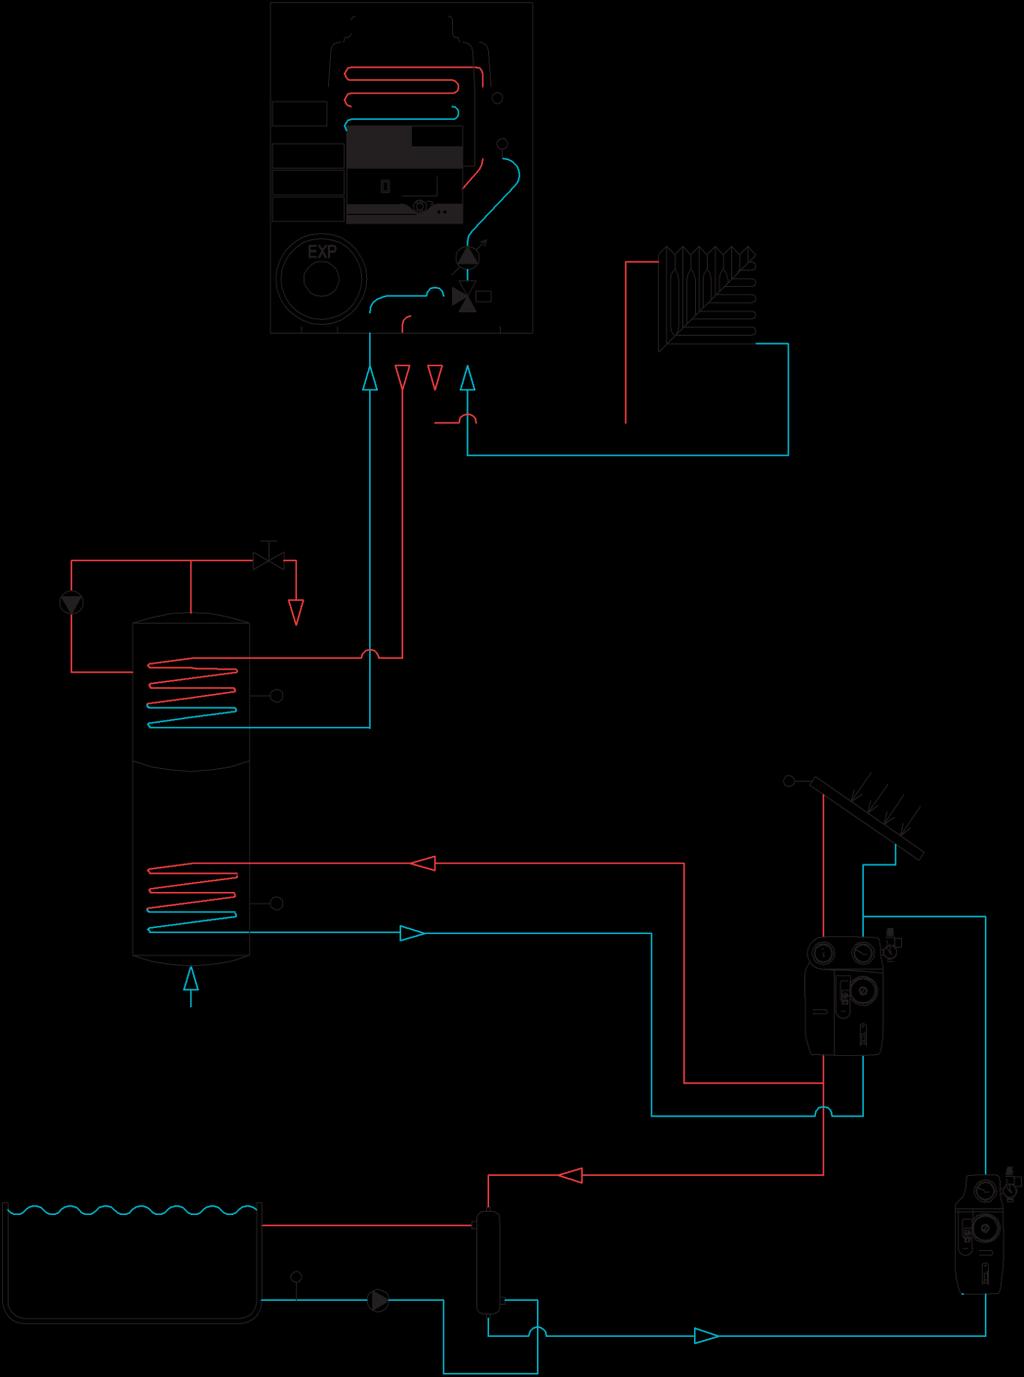 Connection diagram T1 Basic connection of the THRs condensing boiler intended for one direct heating circuit (radiators or floor heating) with a possibility to be extended by HW heating in an